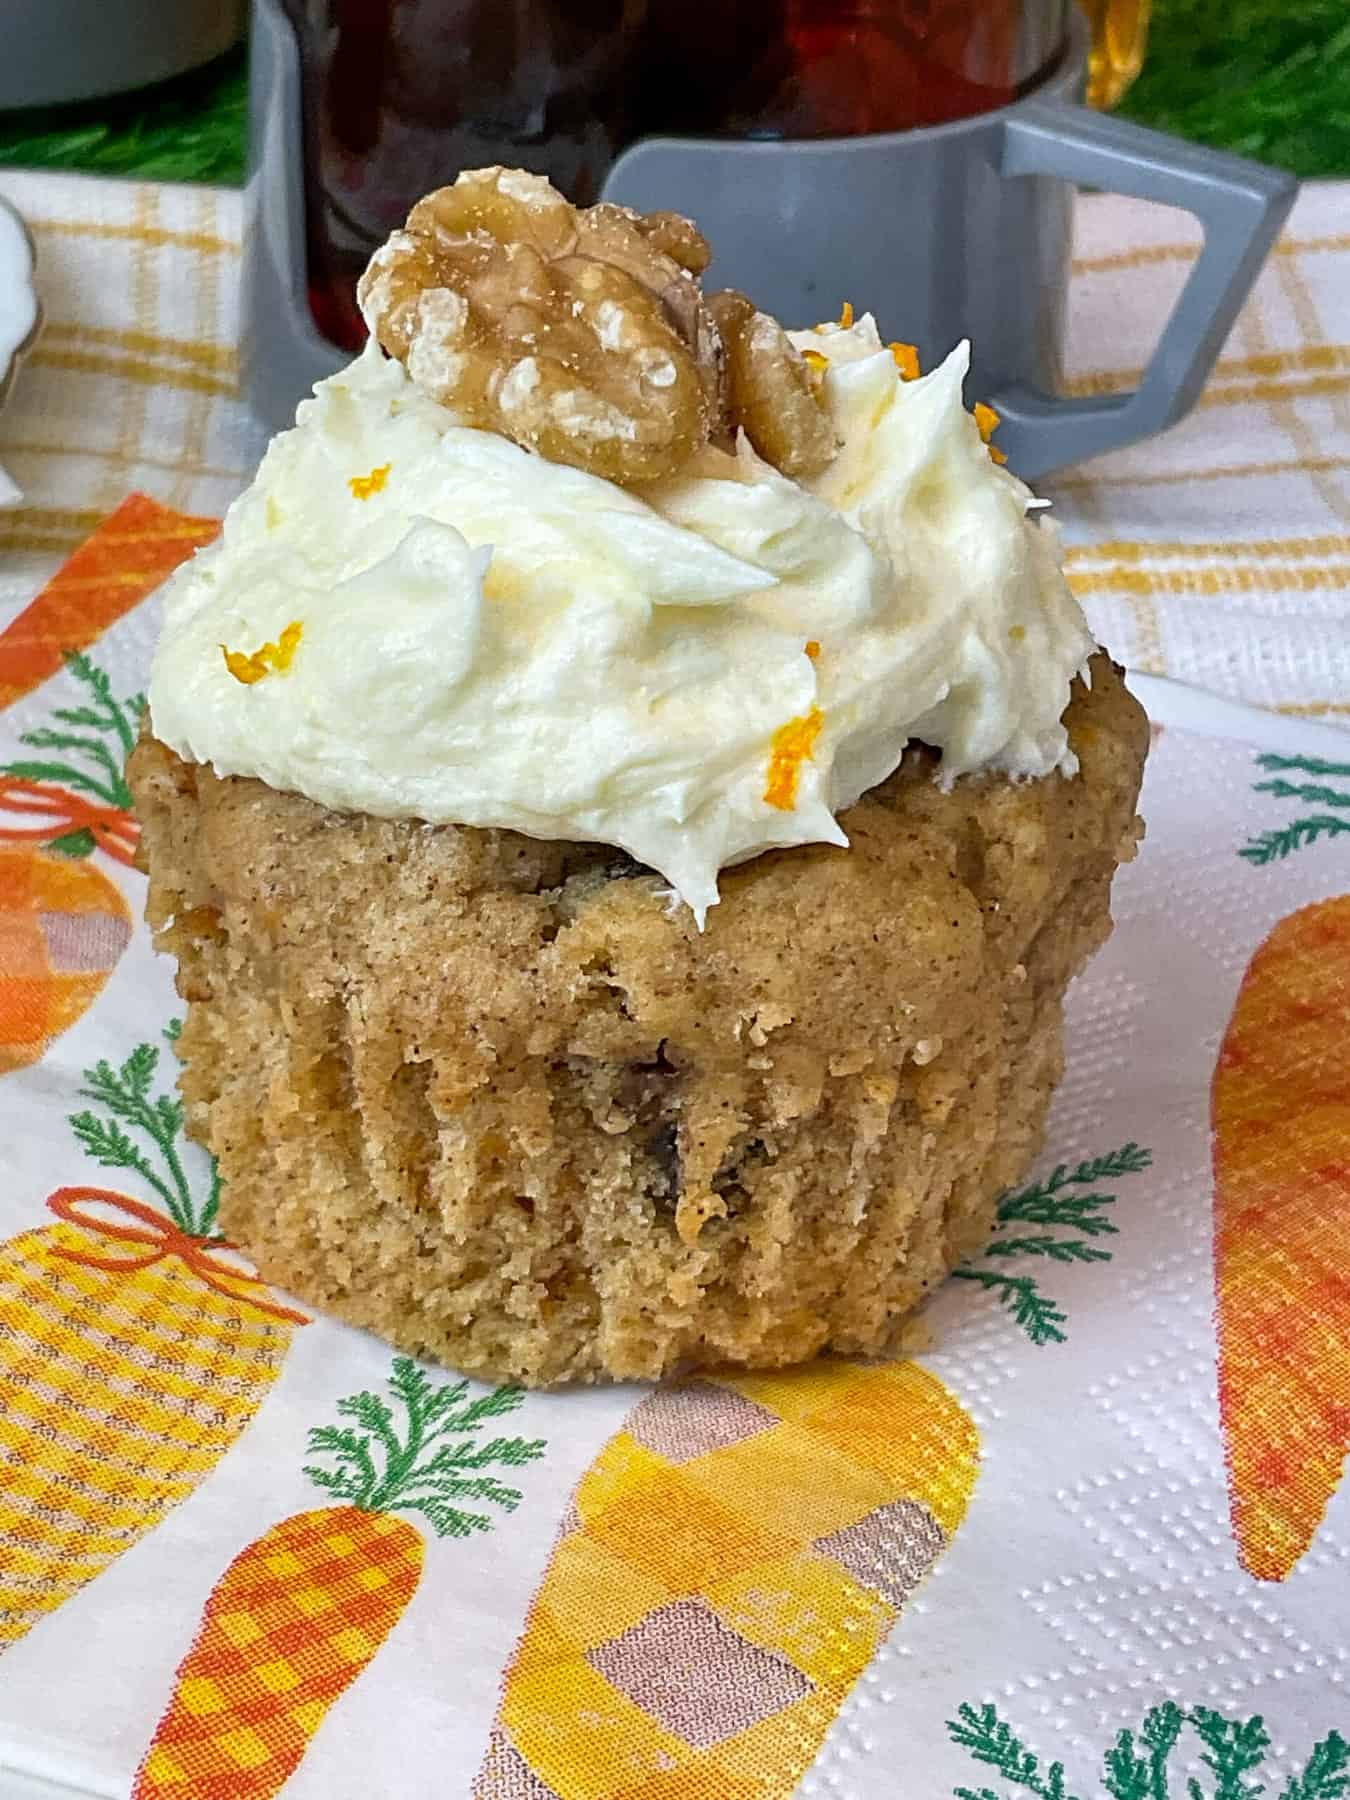 carrot cupcake featured image, one carrot cake sitting on a carrot image napkin with a picnic mug behind.